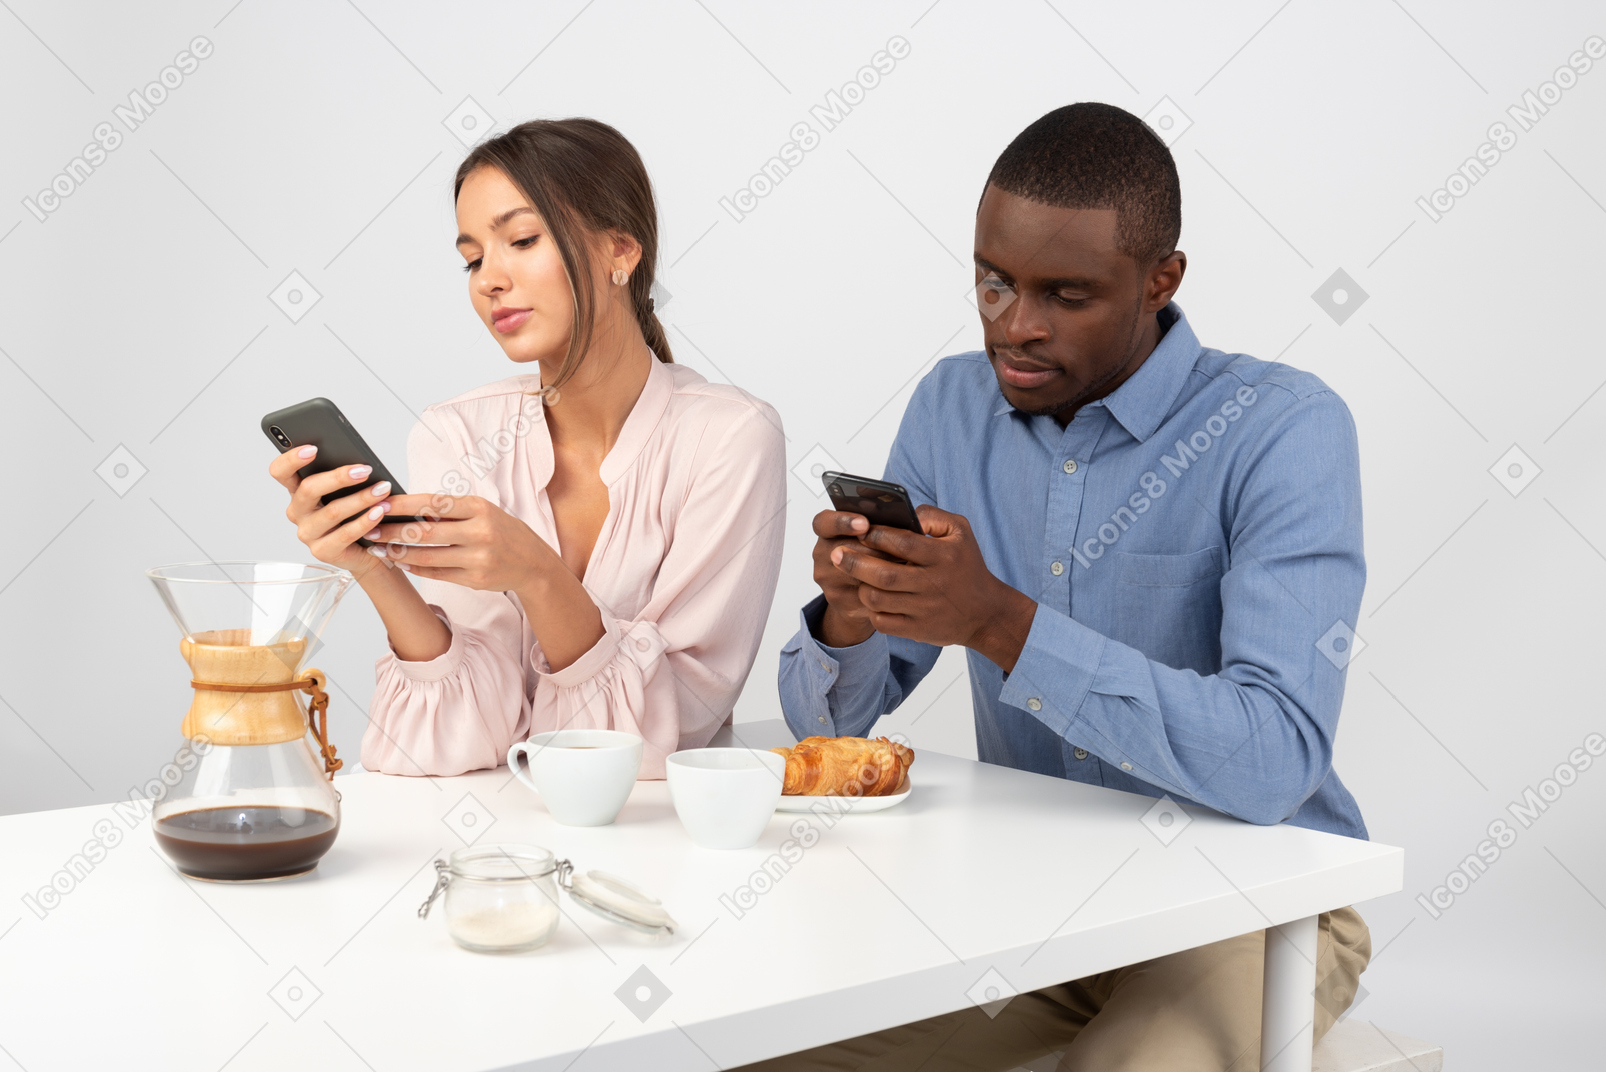 Modern romantic dates are like this